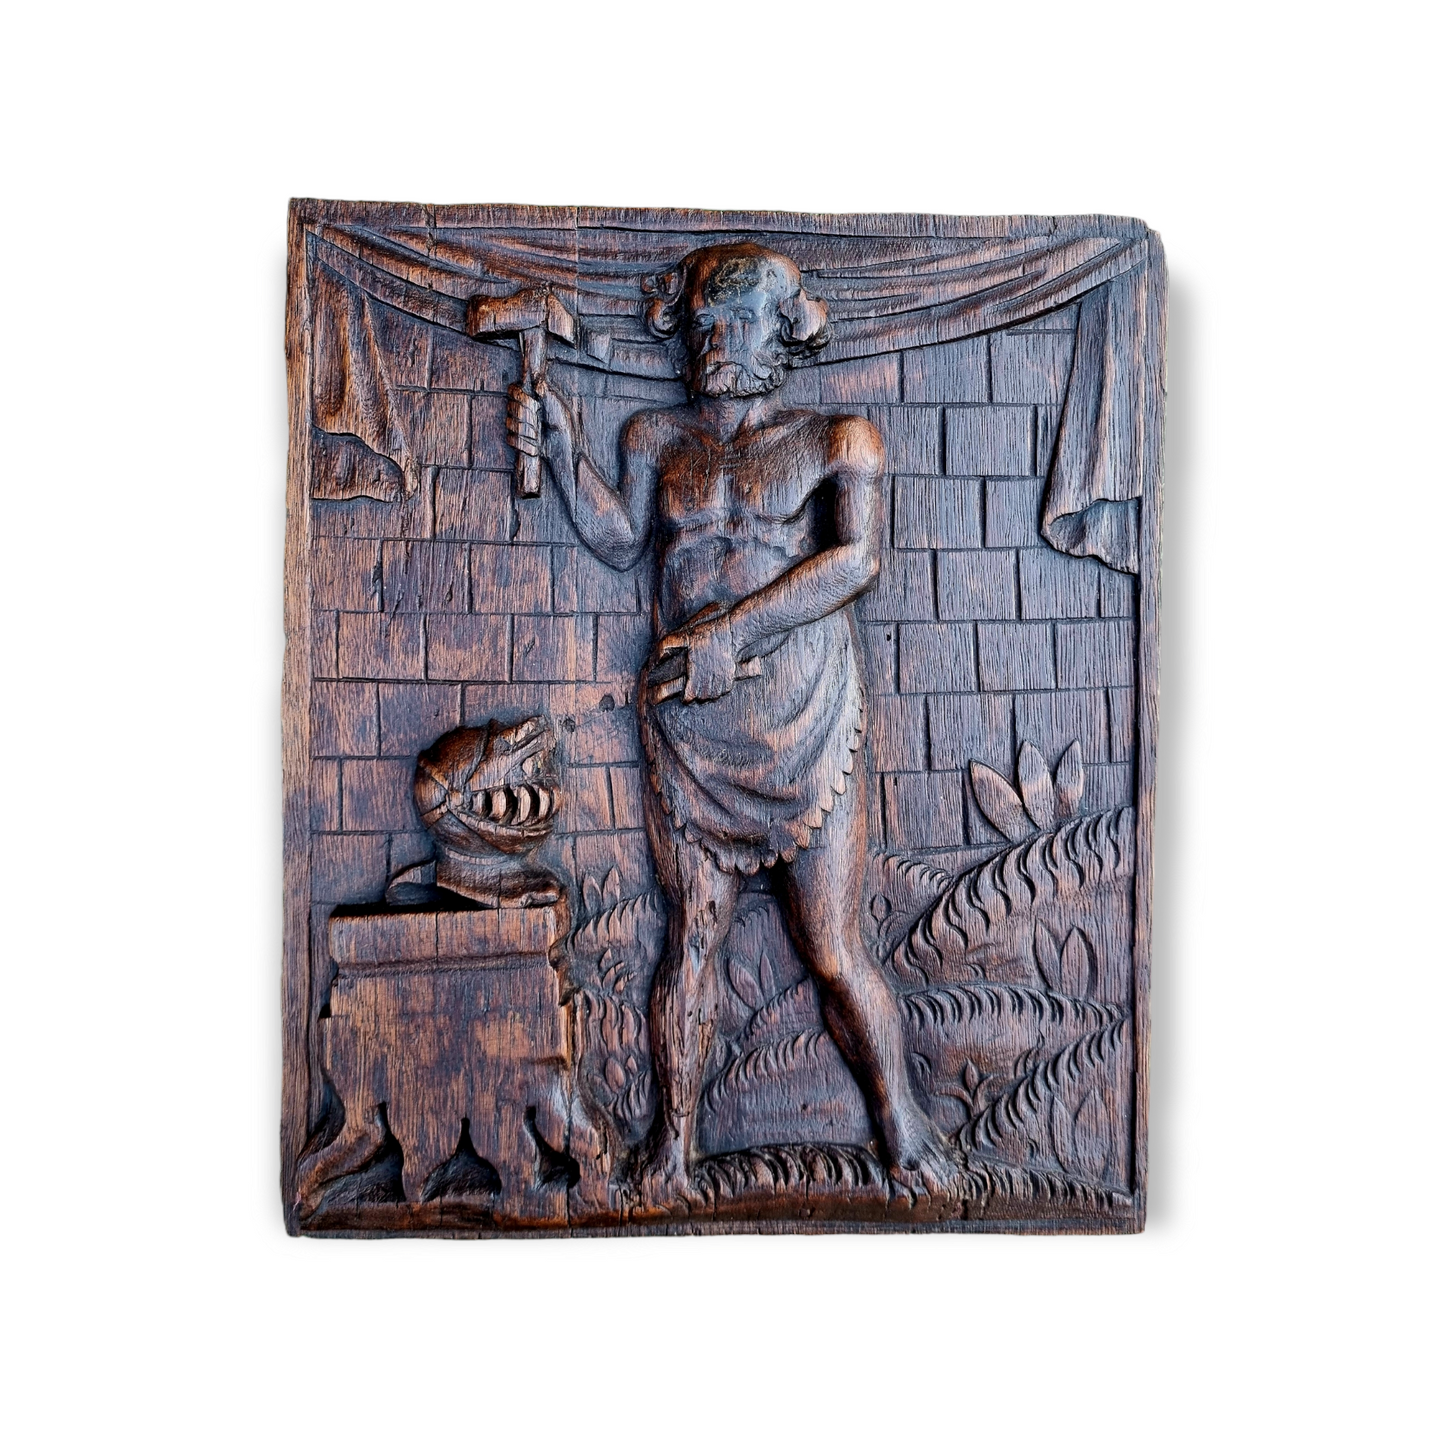 Early 18th Century Flemish Antique Carved Oak Panel Portraying a Blacksmith